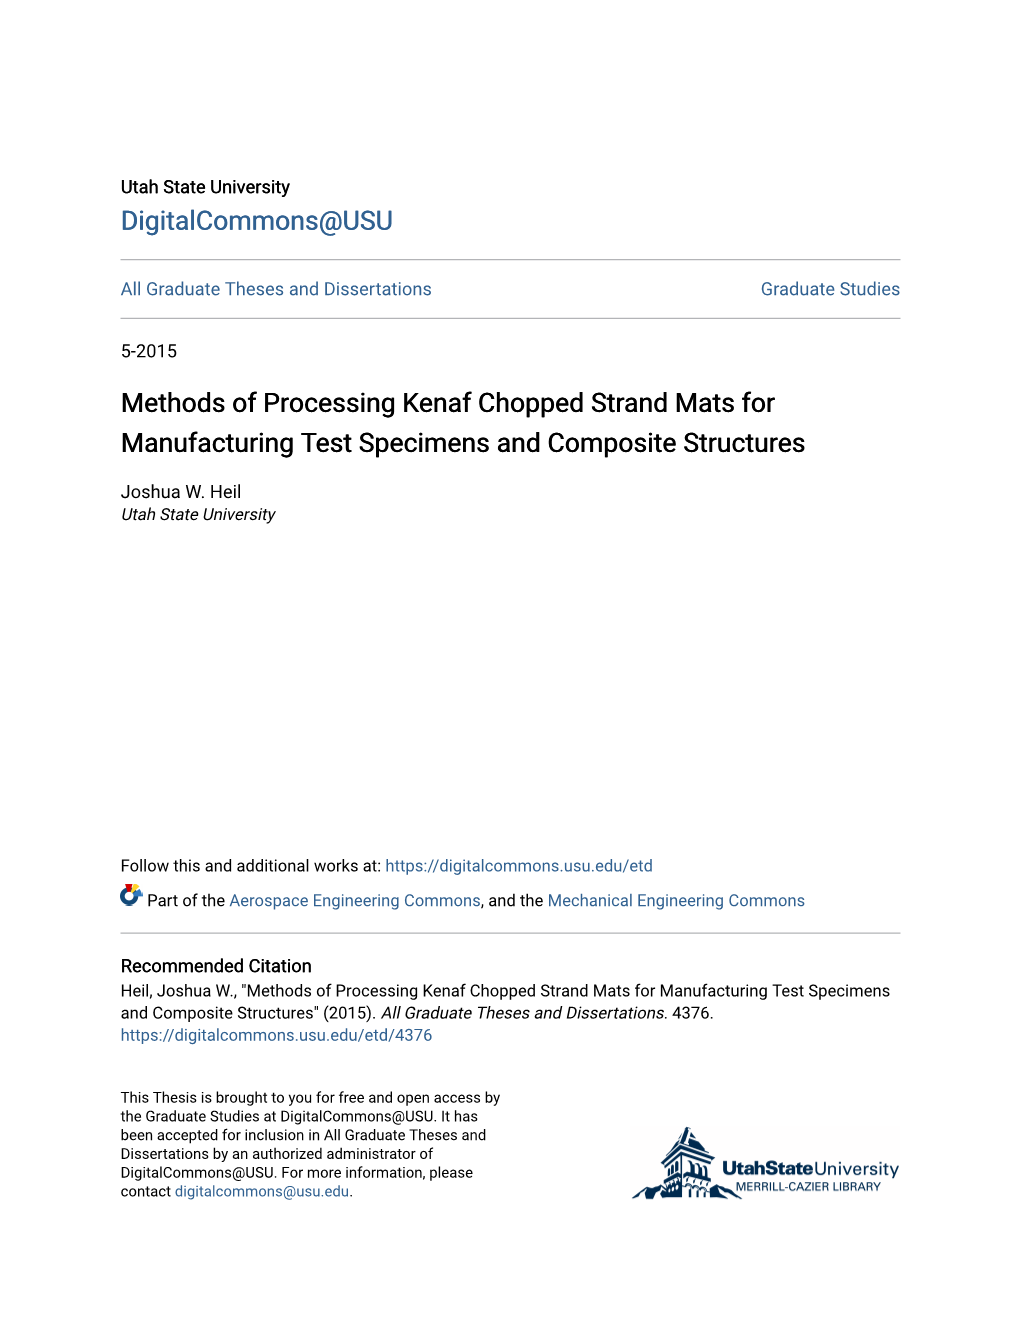 Methods of Processing Kenaf Chopped Strand Mats for Manufacturing Test Specimens and Composite Structures